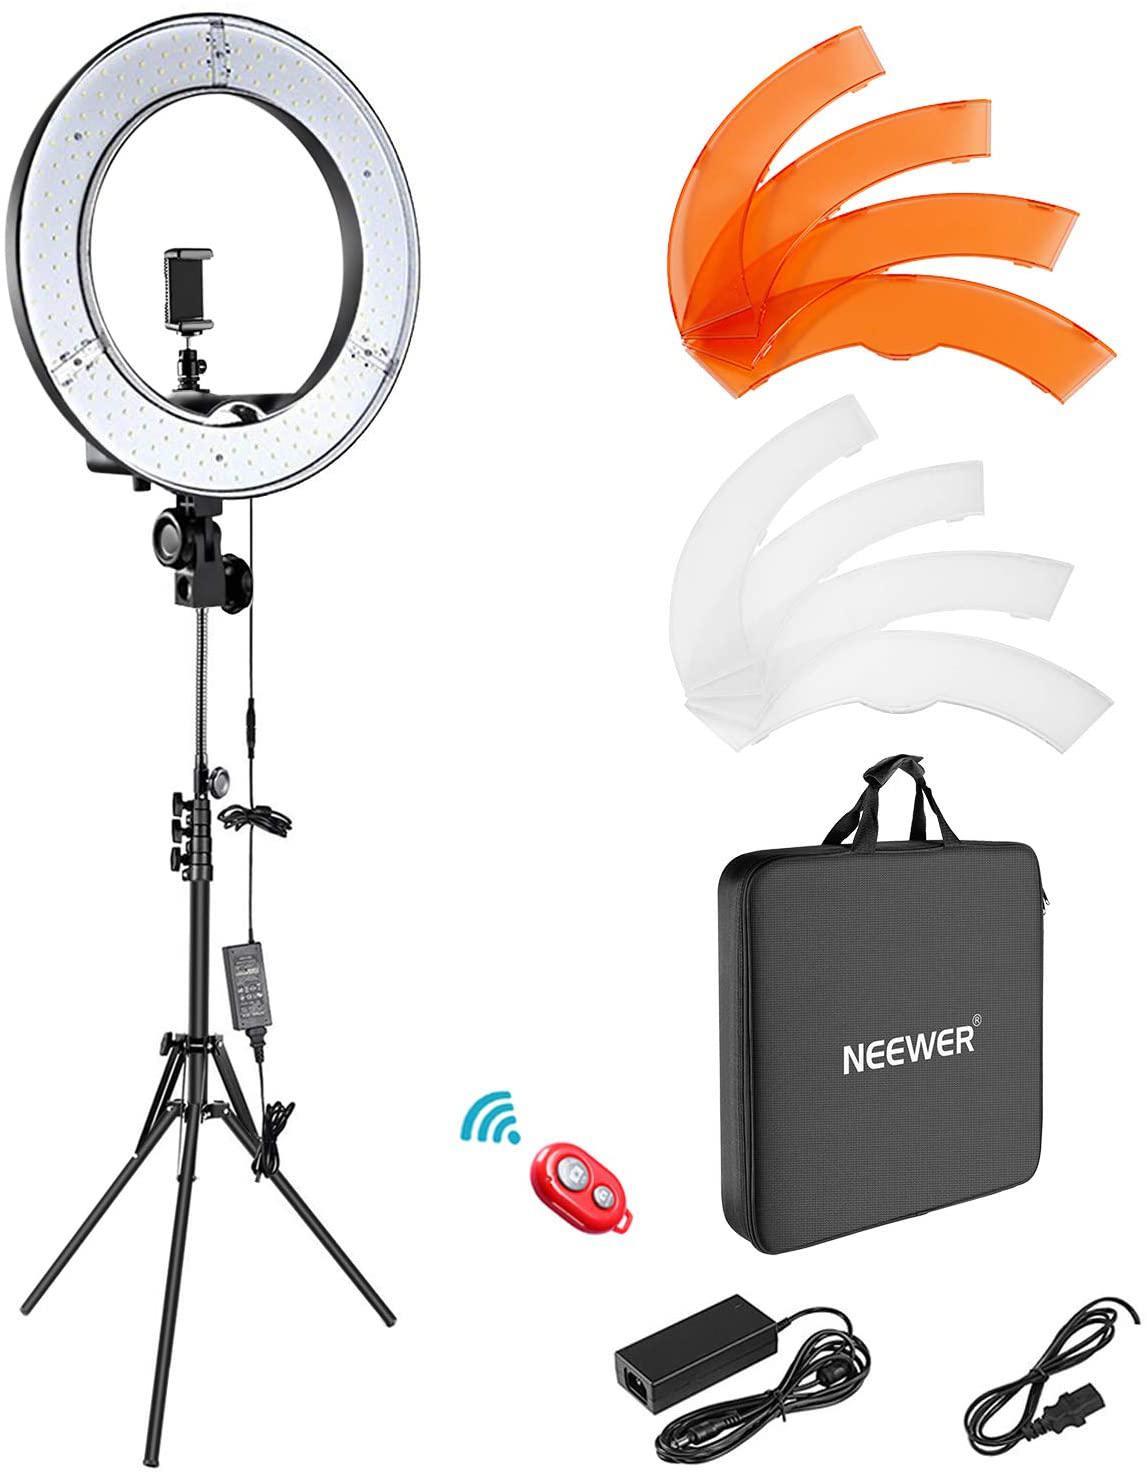 Neewer Camera Photo Video Light Kit: 18 Inches/48 Centimeters Outer 55W 5500K Dimmable LED Ring Light, Light Stand, Receiver for Smartphone